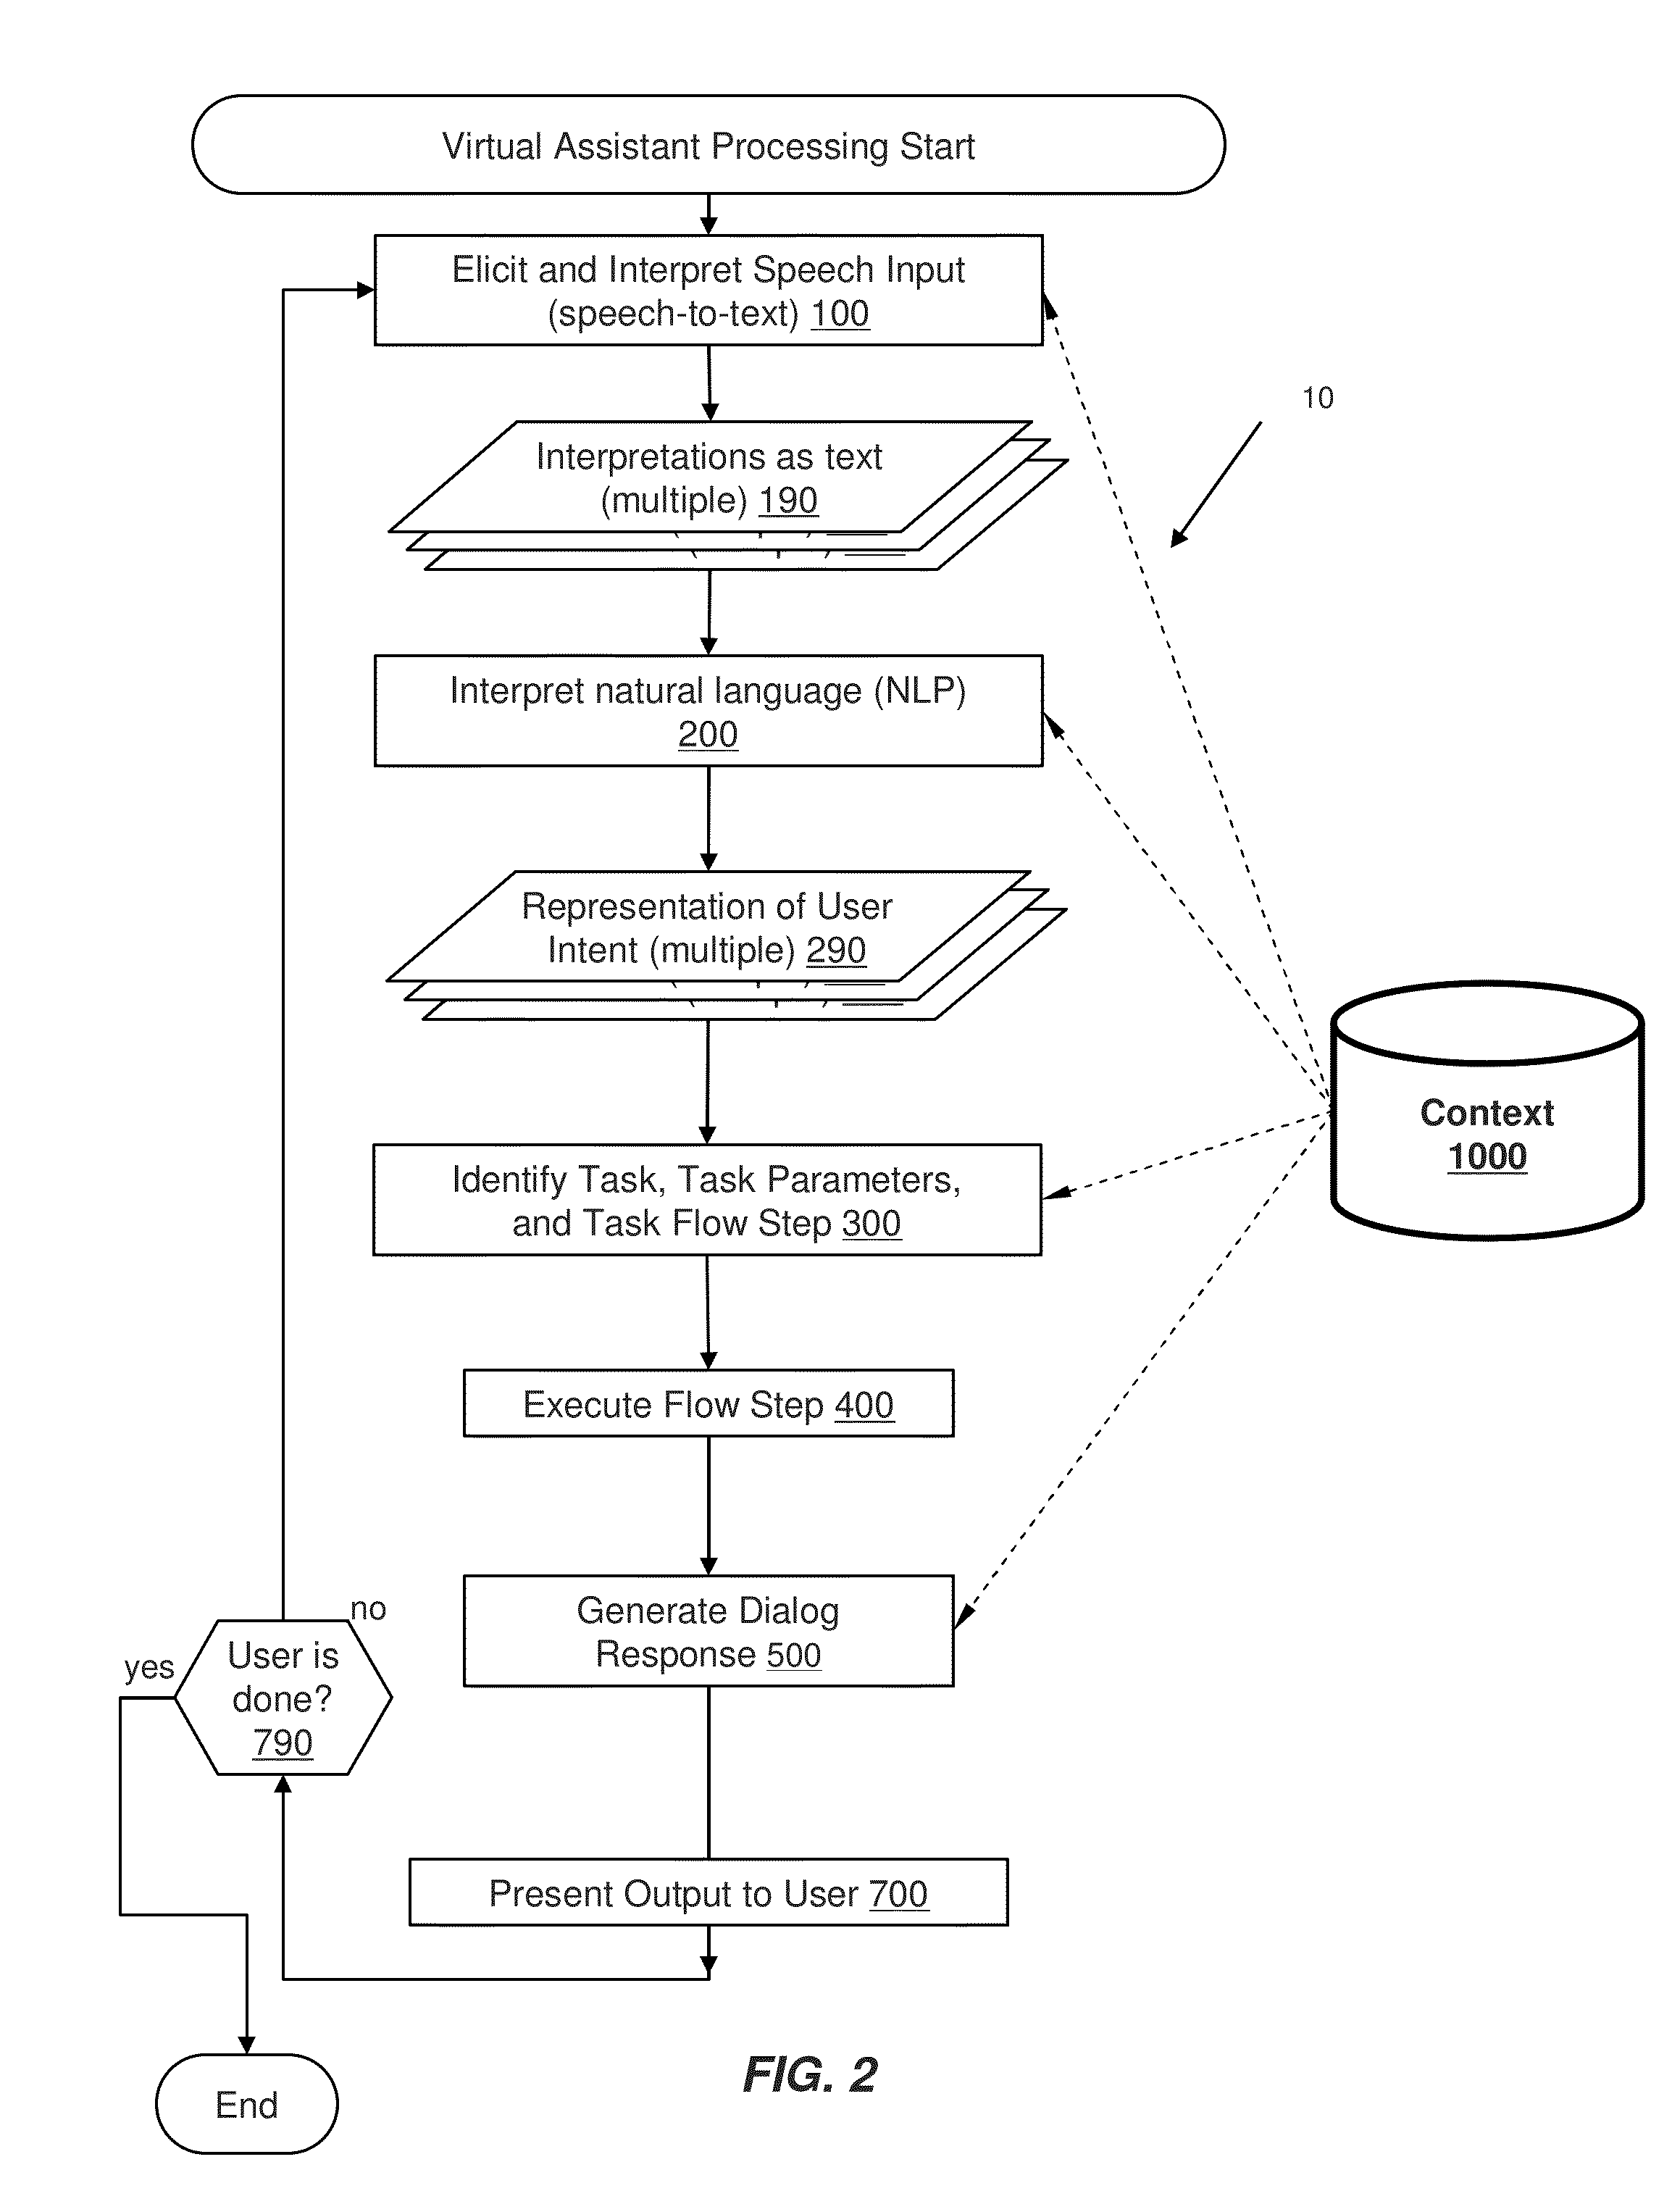 Interface for a Virtual Digital Assistant